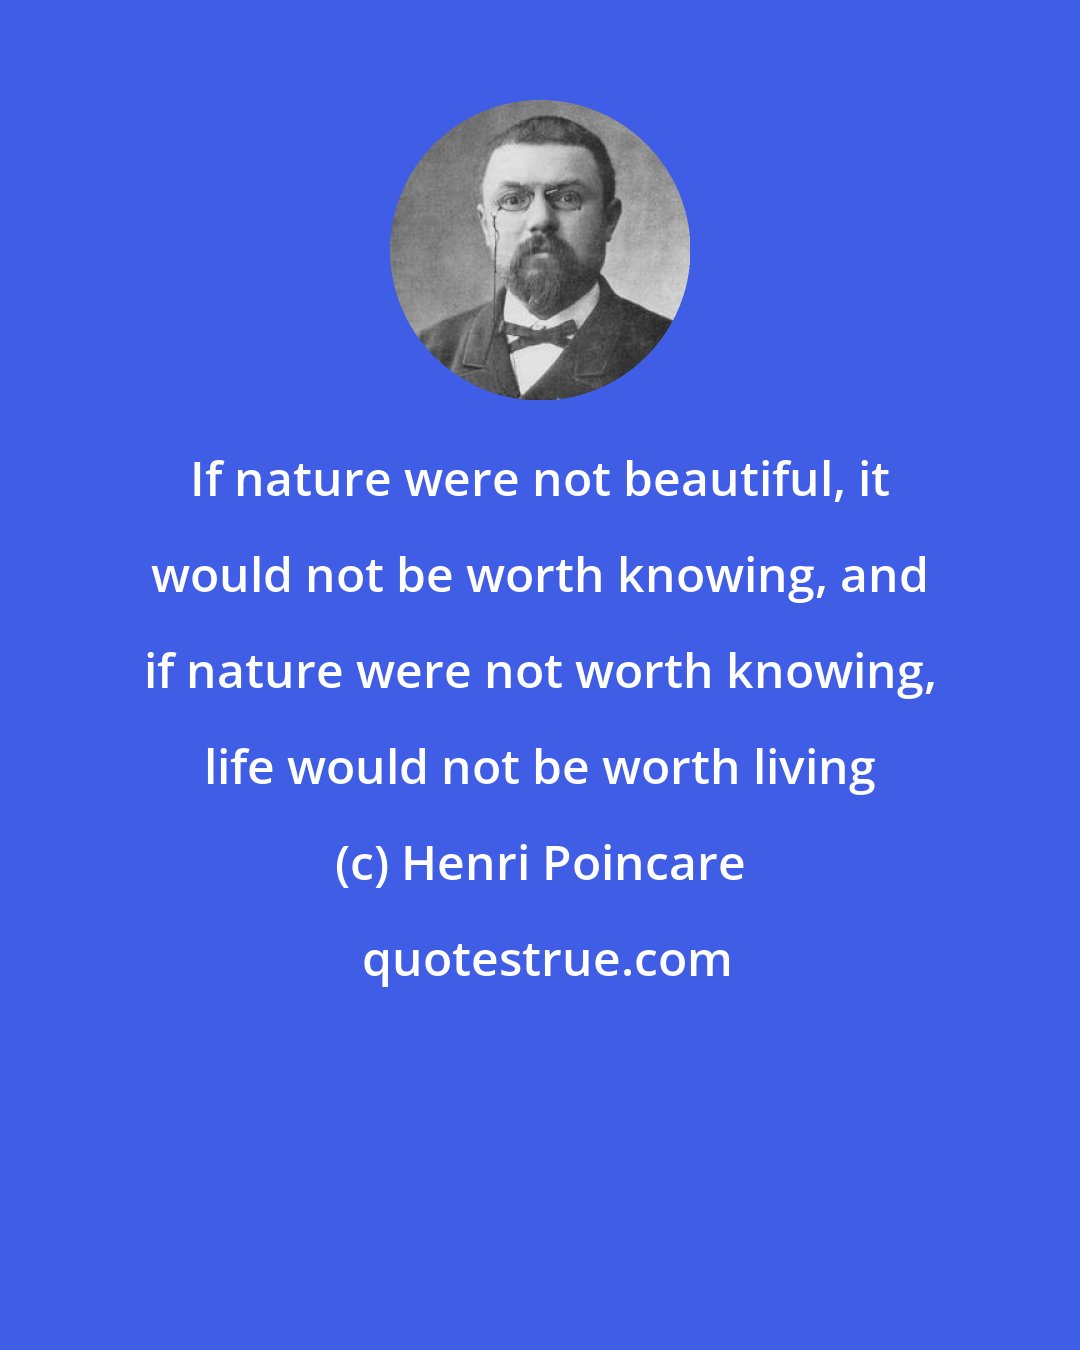 Henri Poincare: If nature were not beautiful, it would not be worth knowing, and if nature were not worth knowing, life would not be worth living